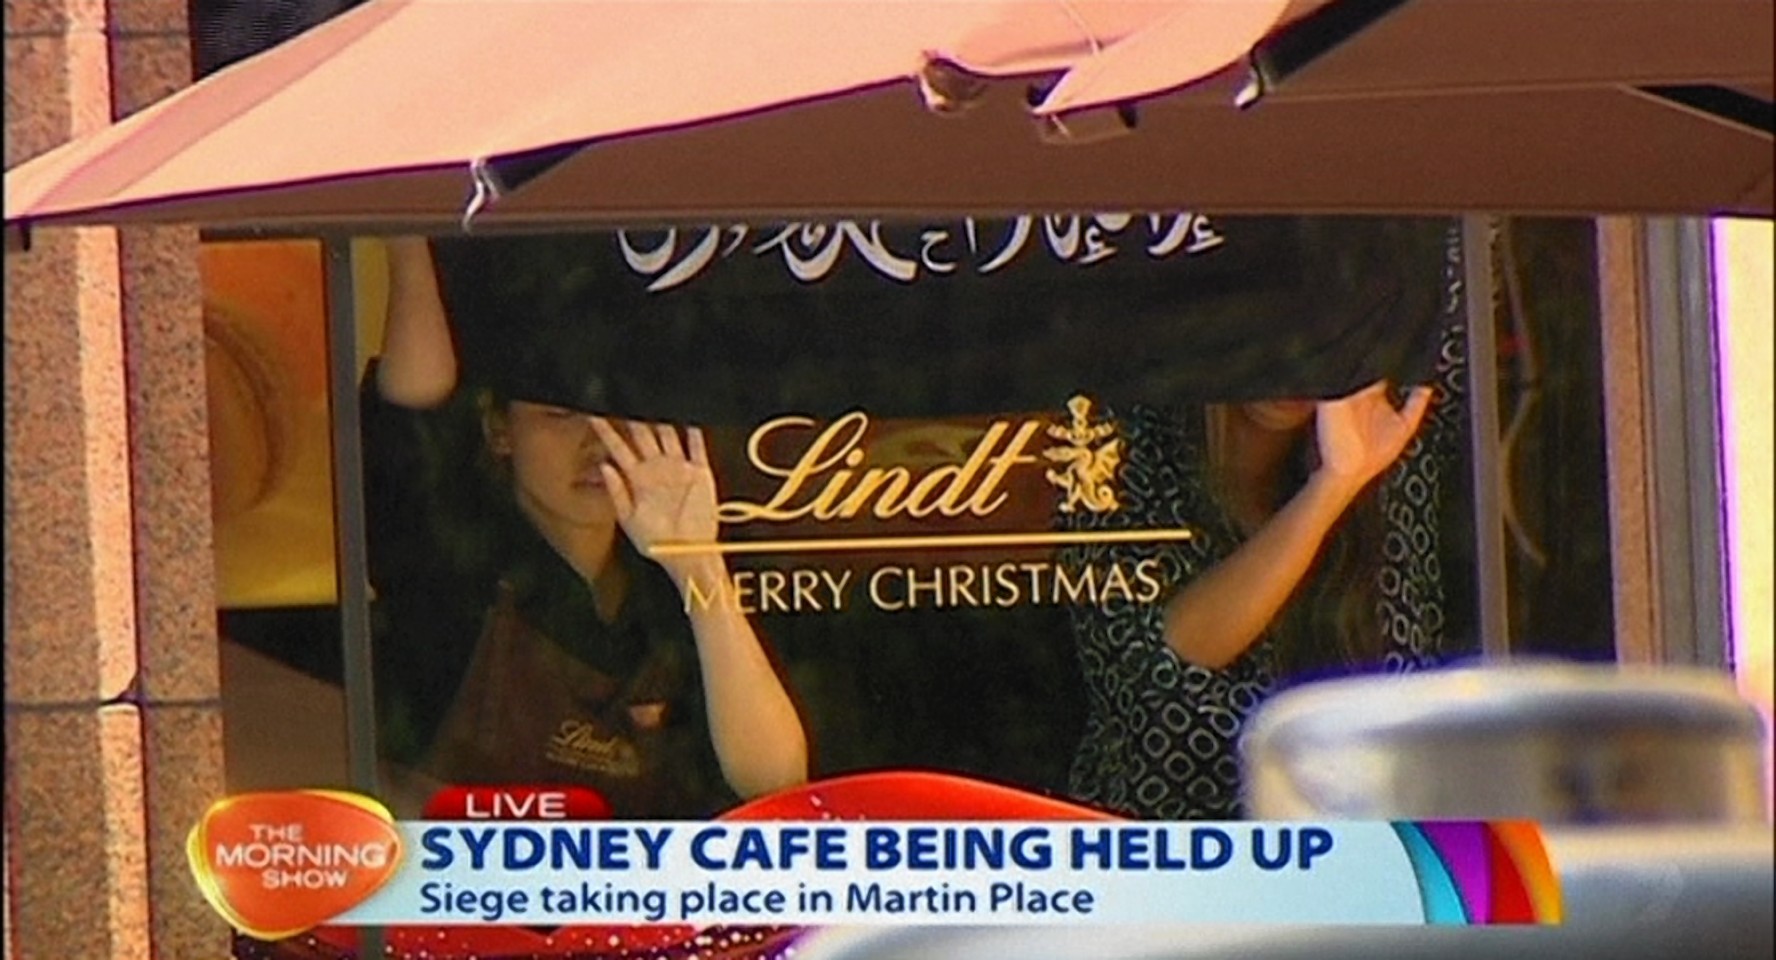 Hostages hold up an Islamic flag at the Sydney cafe